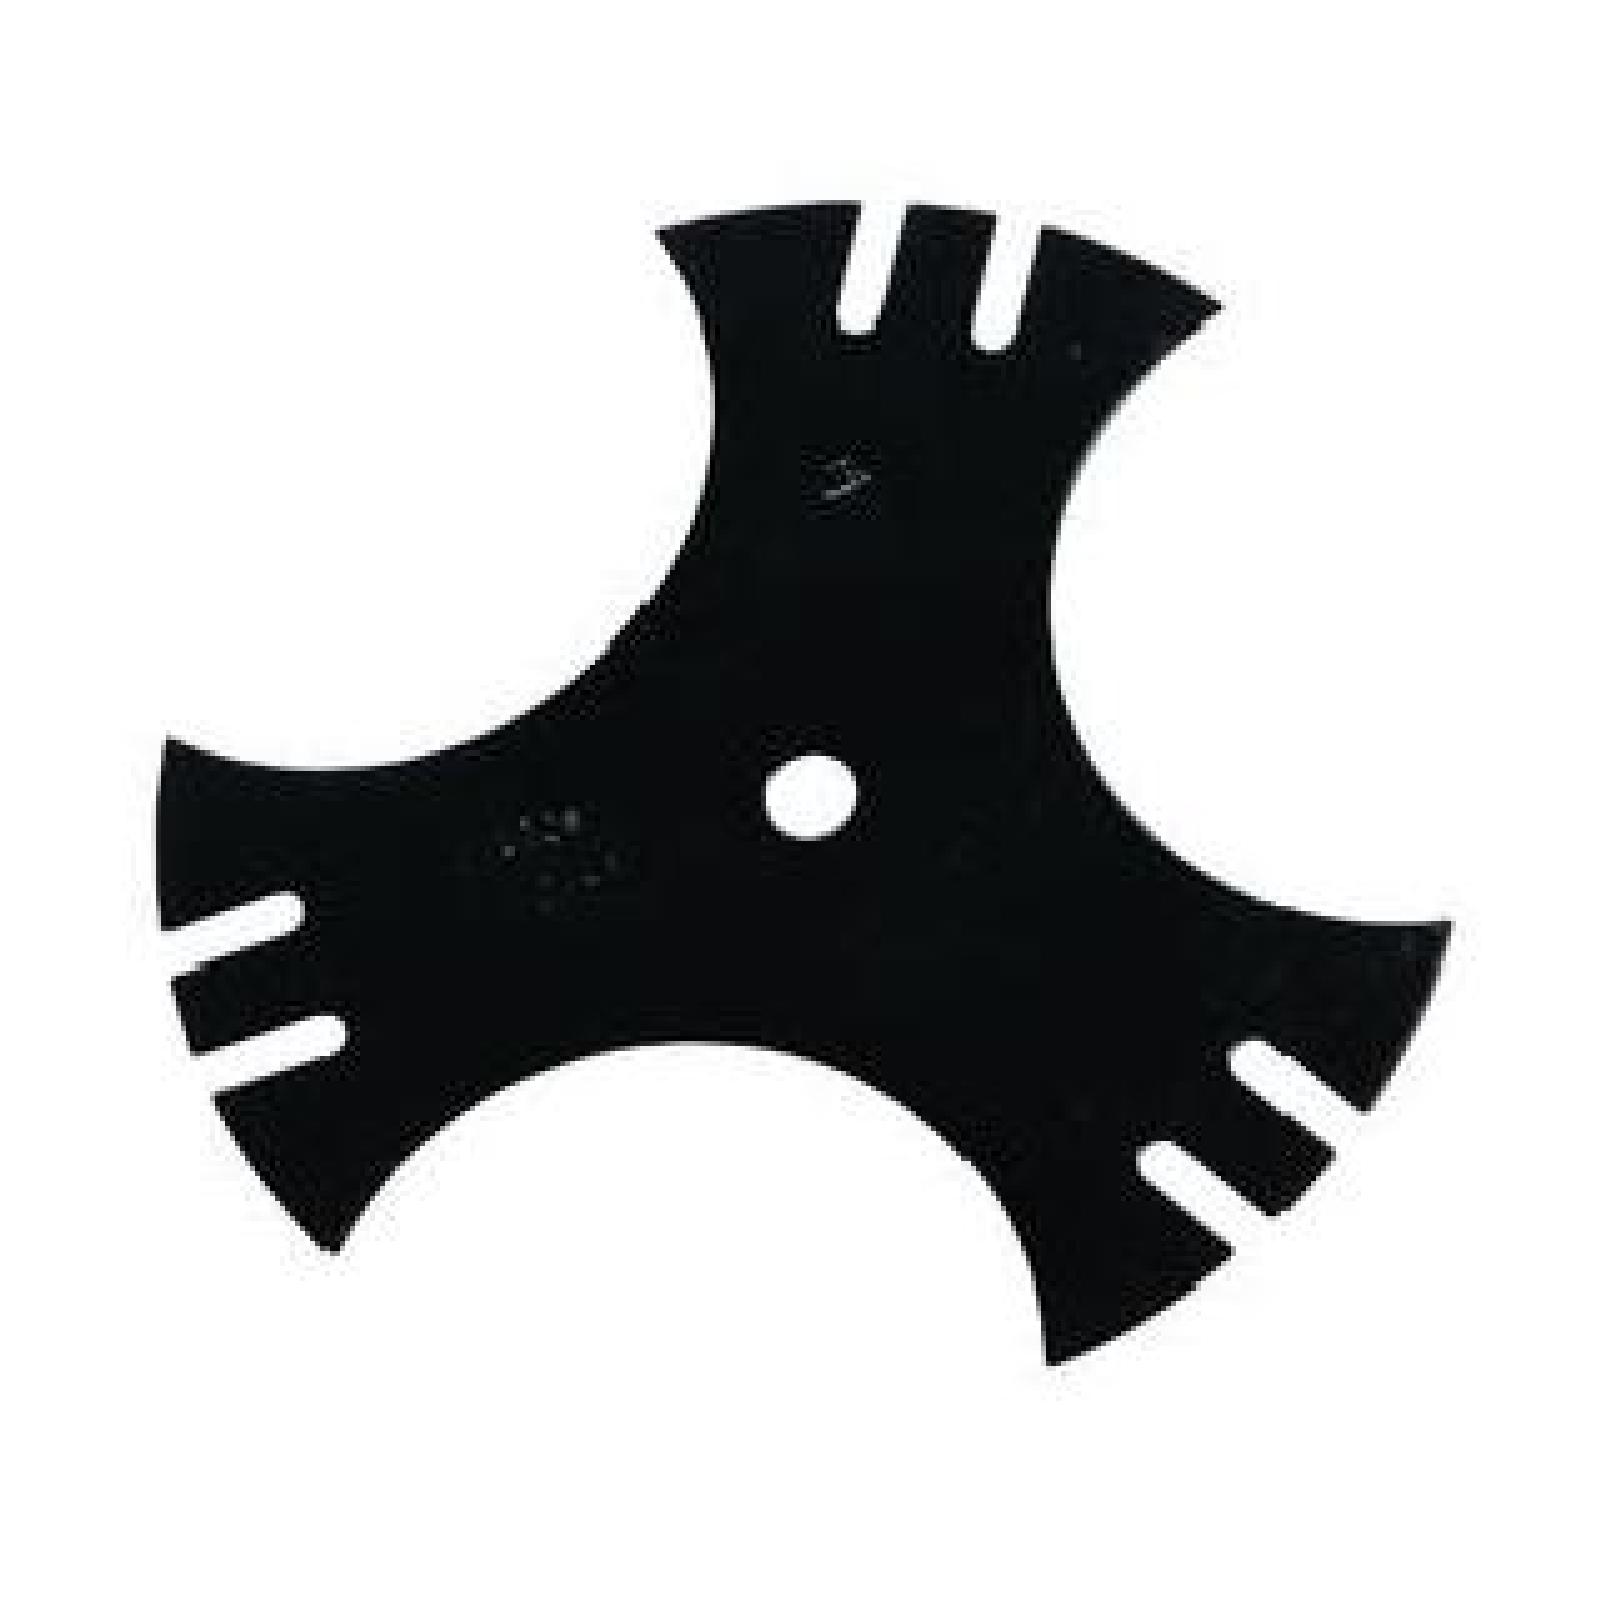 EDGER BLADE, 9IN X 5/8 3 part# 40-009 by Oregon